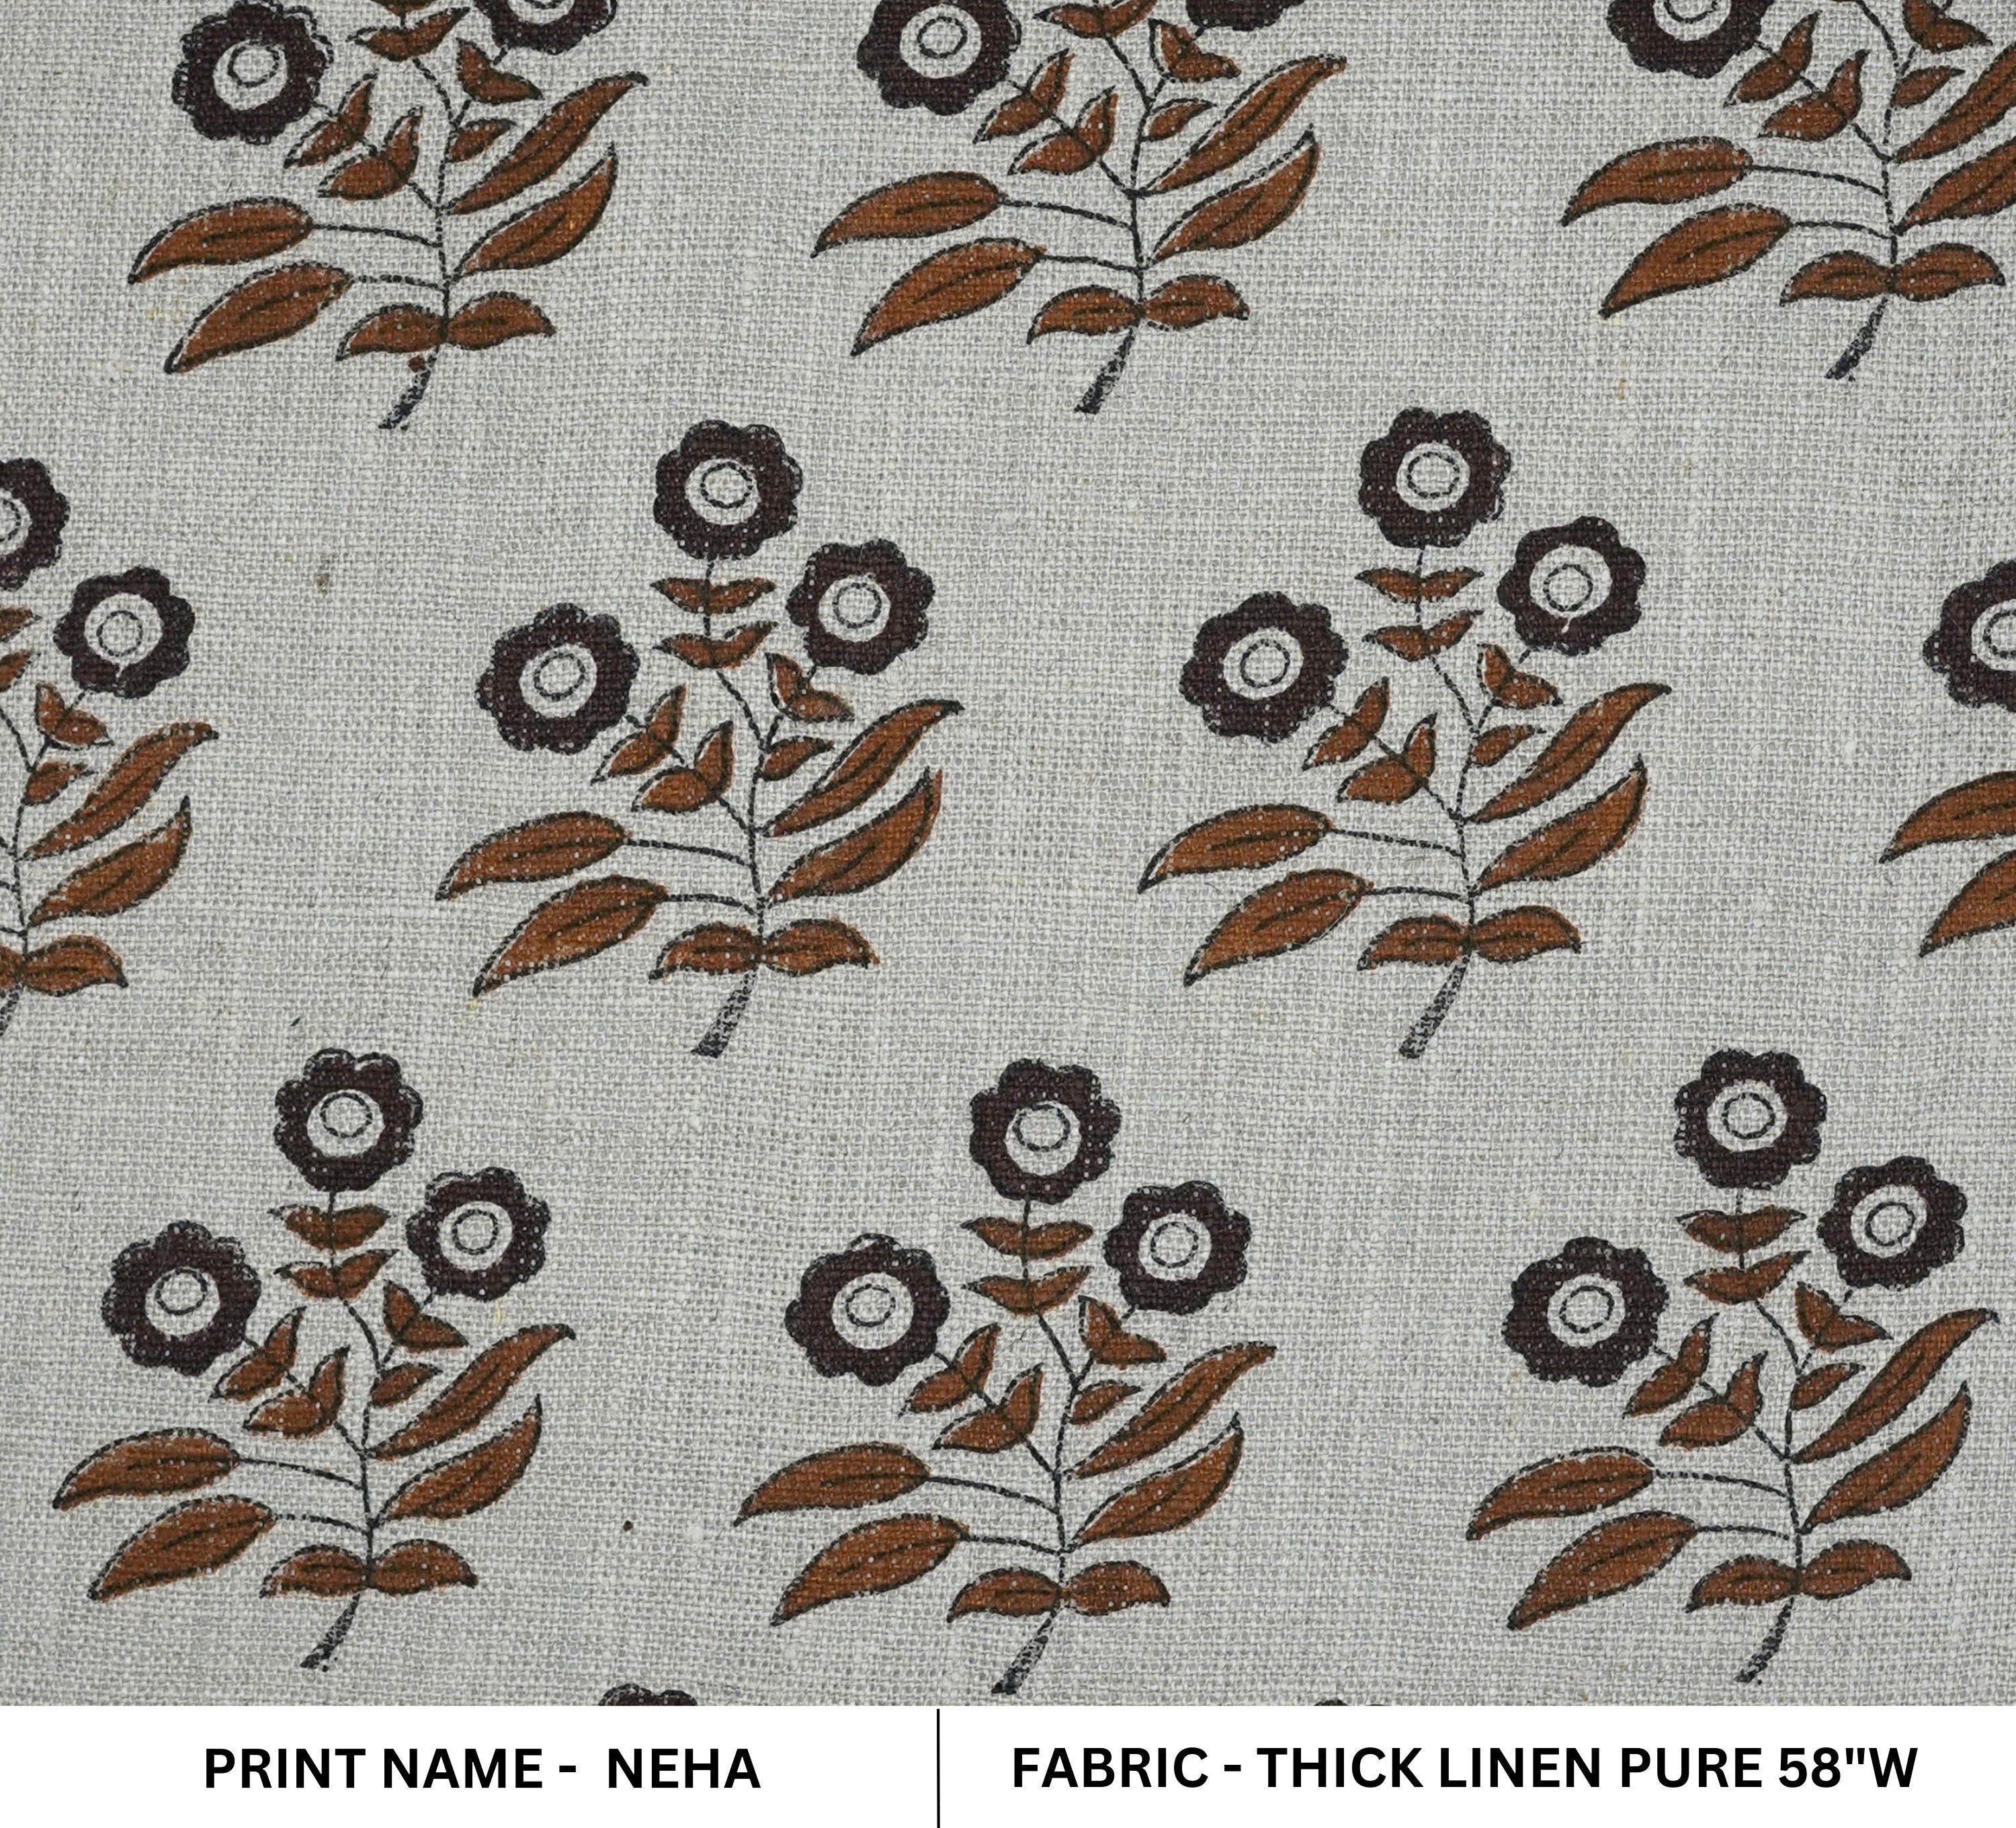 Floral block print fabric, thick linen 58" wide, upholstery fabric for curtains, cushions, handmade art, handloom fabric - NEHA